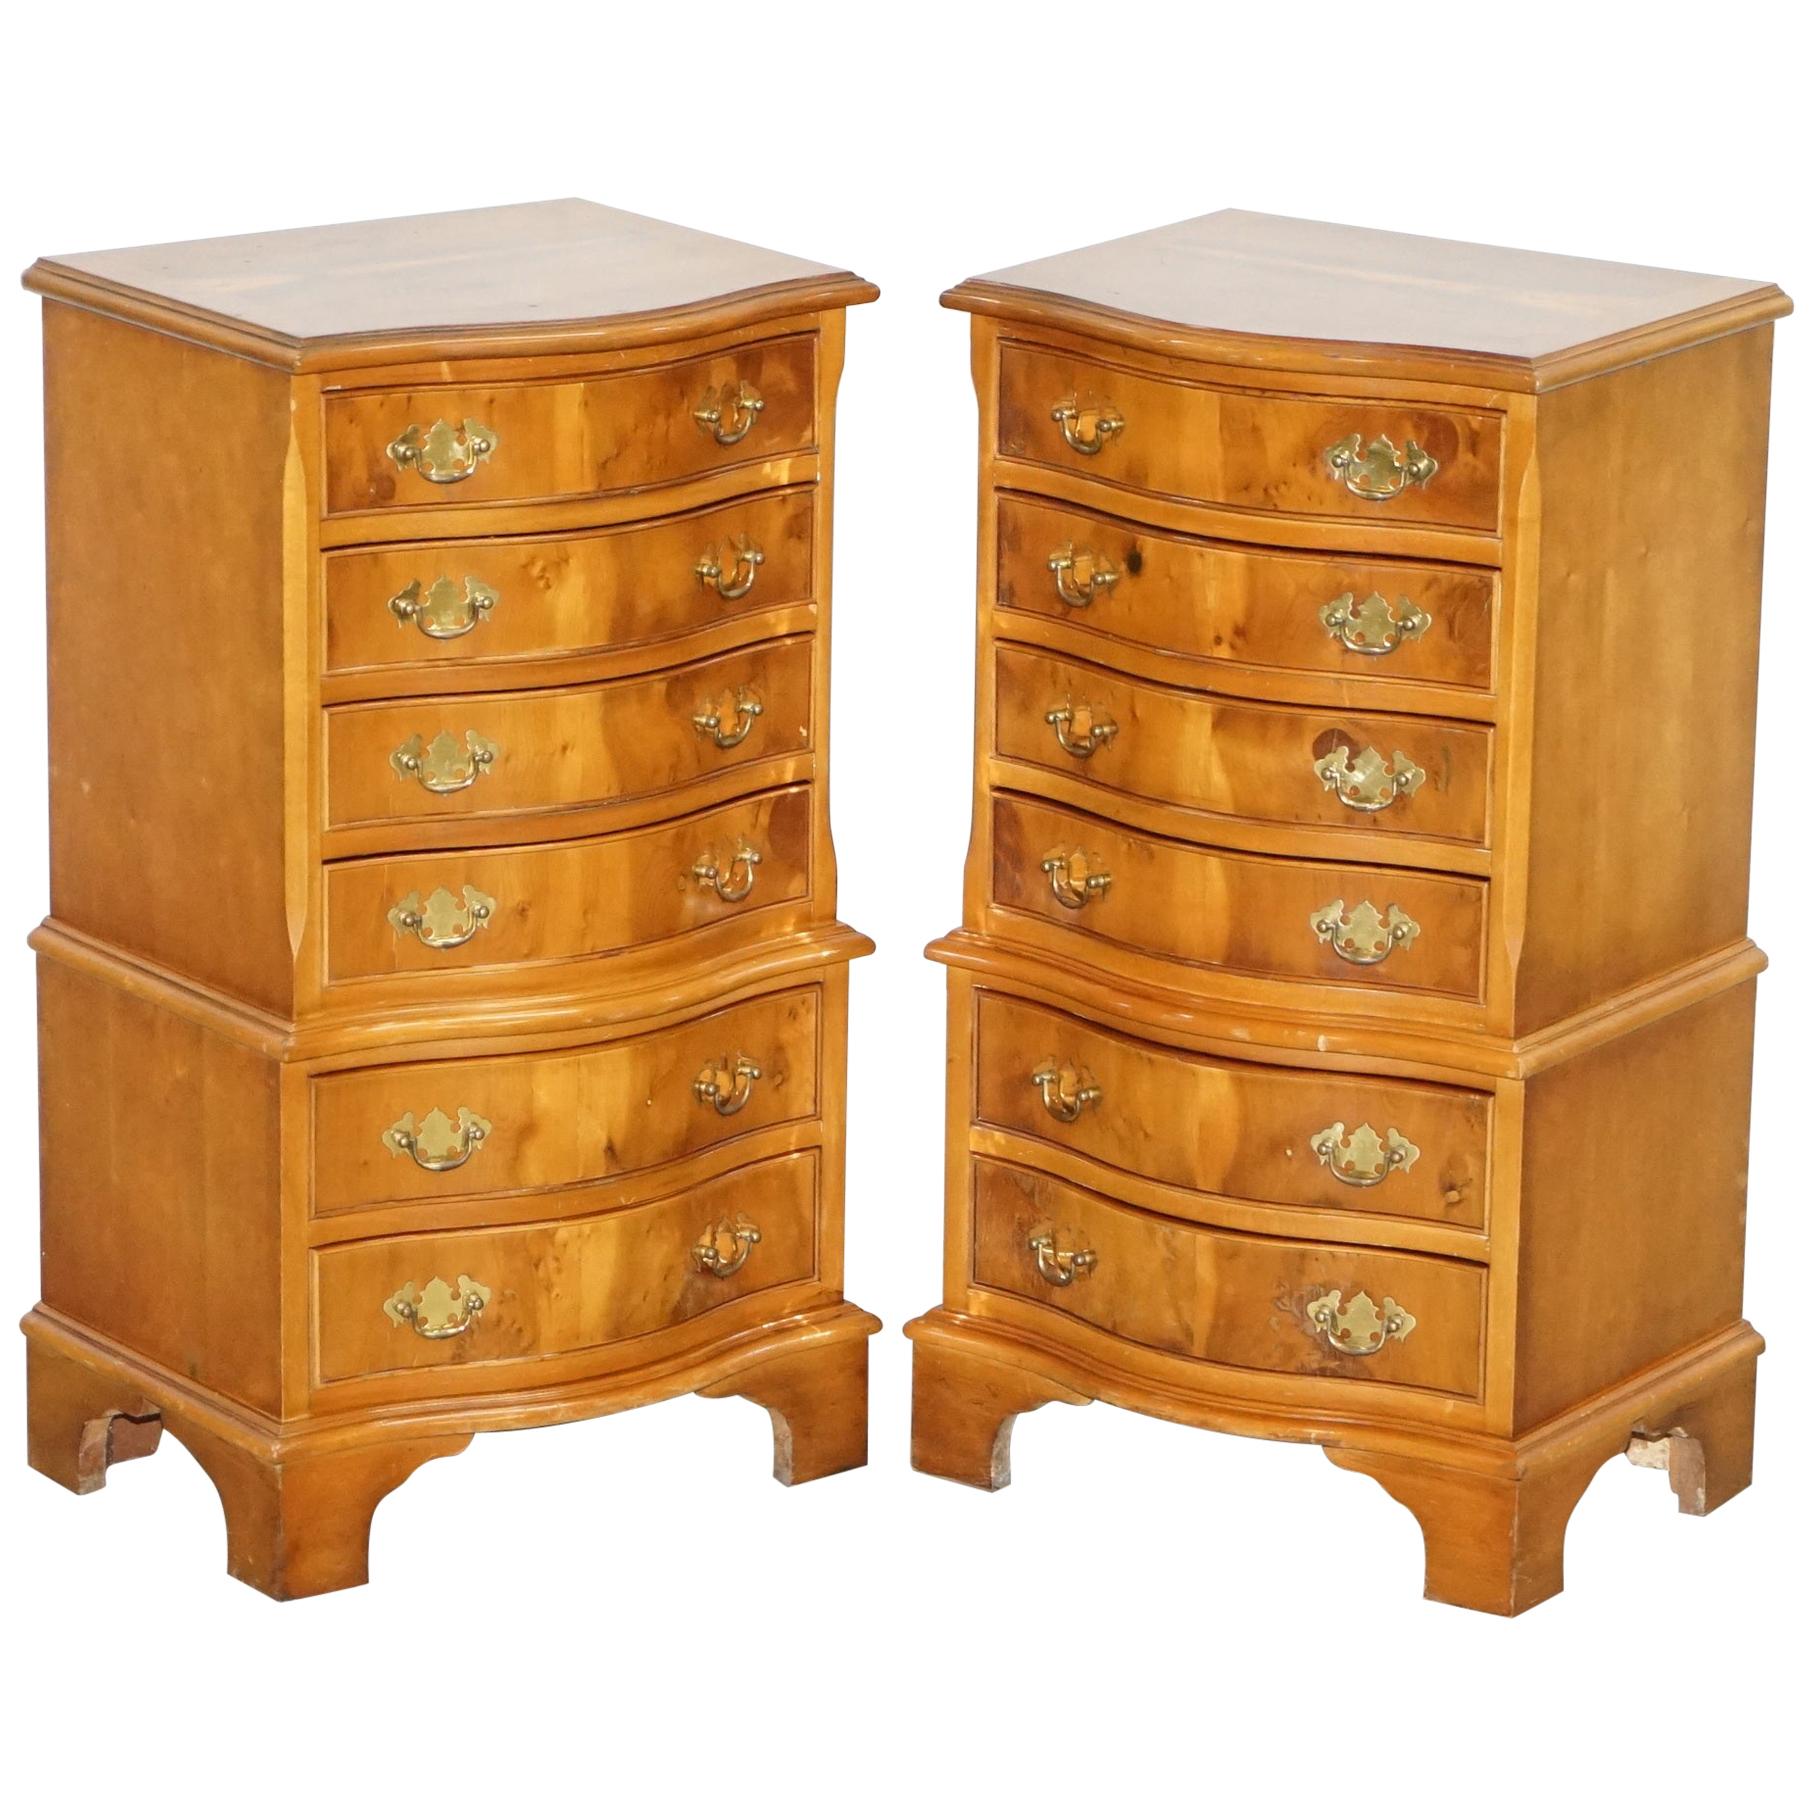 Lovely Pair of Burr Yew Wood Small Sized Tallboy Chests of Drawers Lamp Tables For Sale